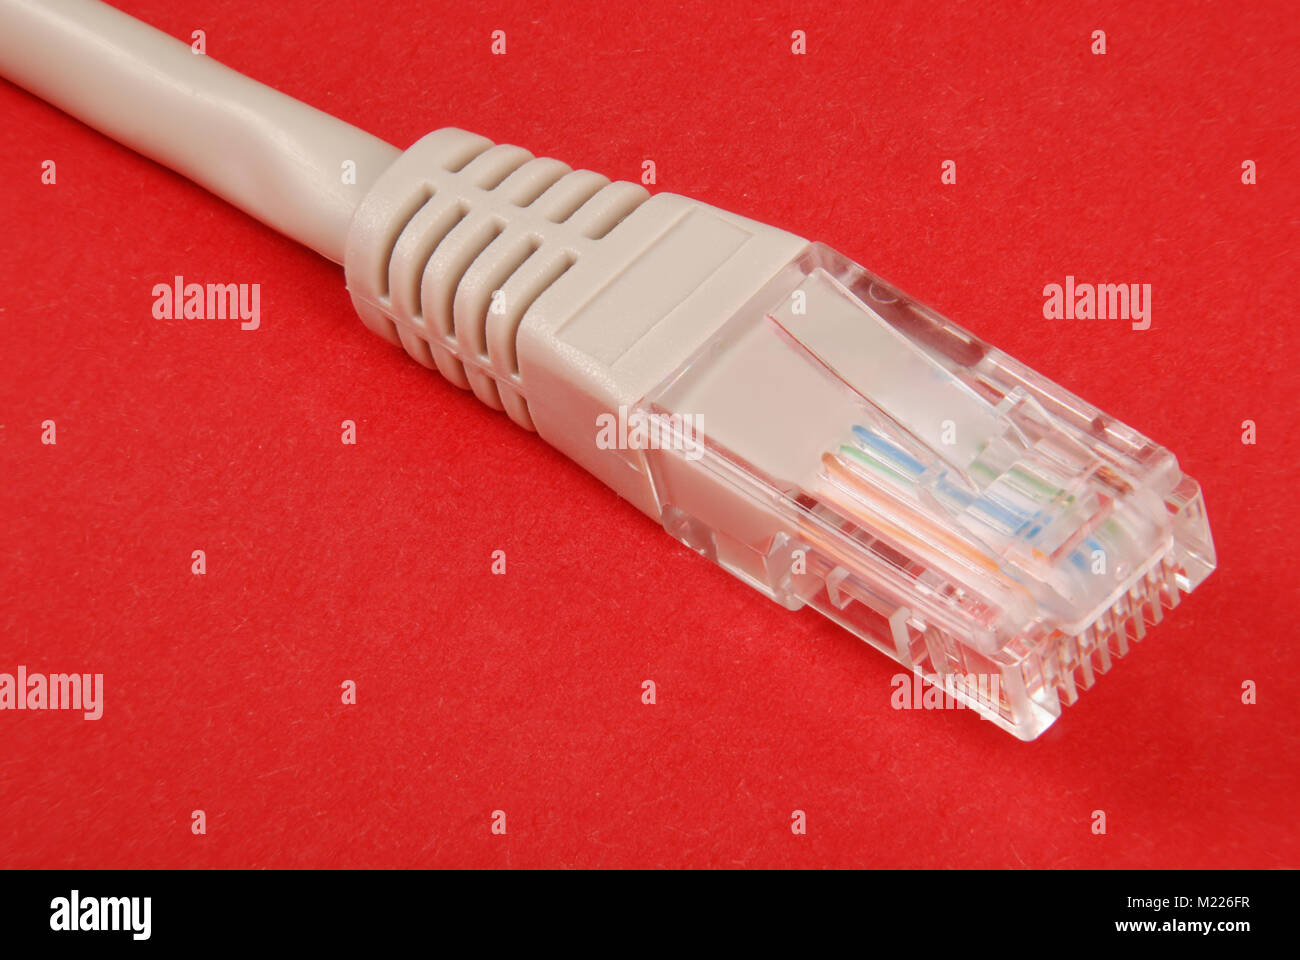 Lan cable and connector RJ45, isolated on red background. Stock Photo